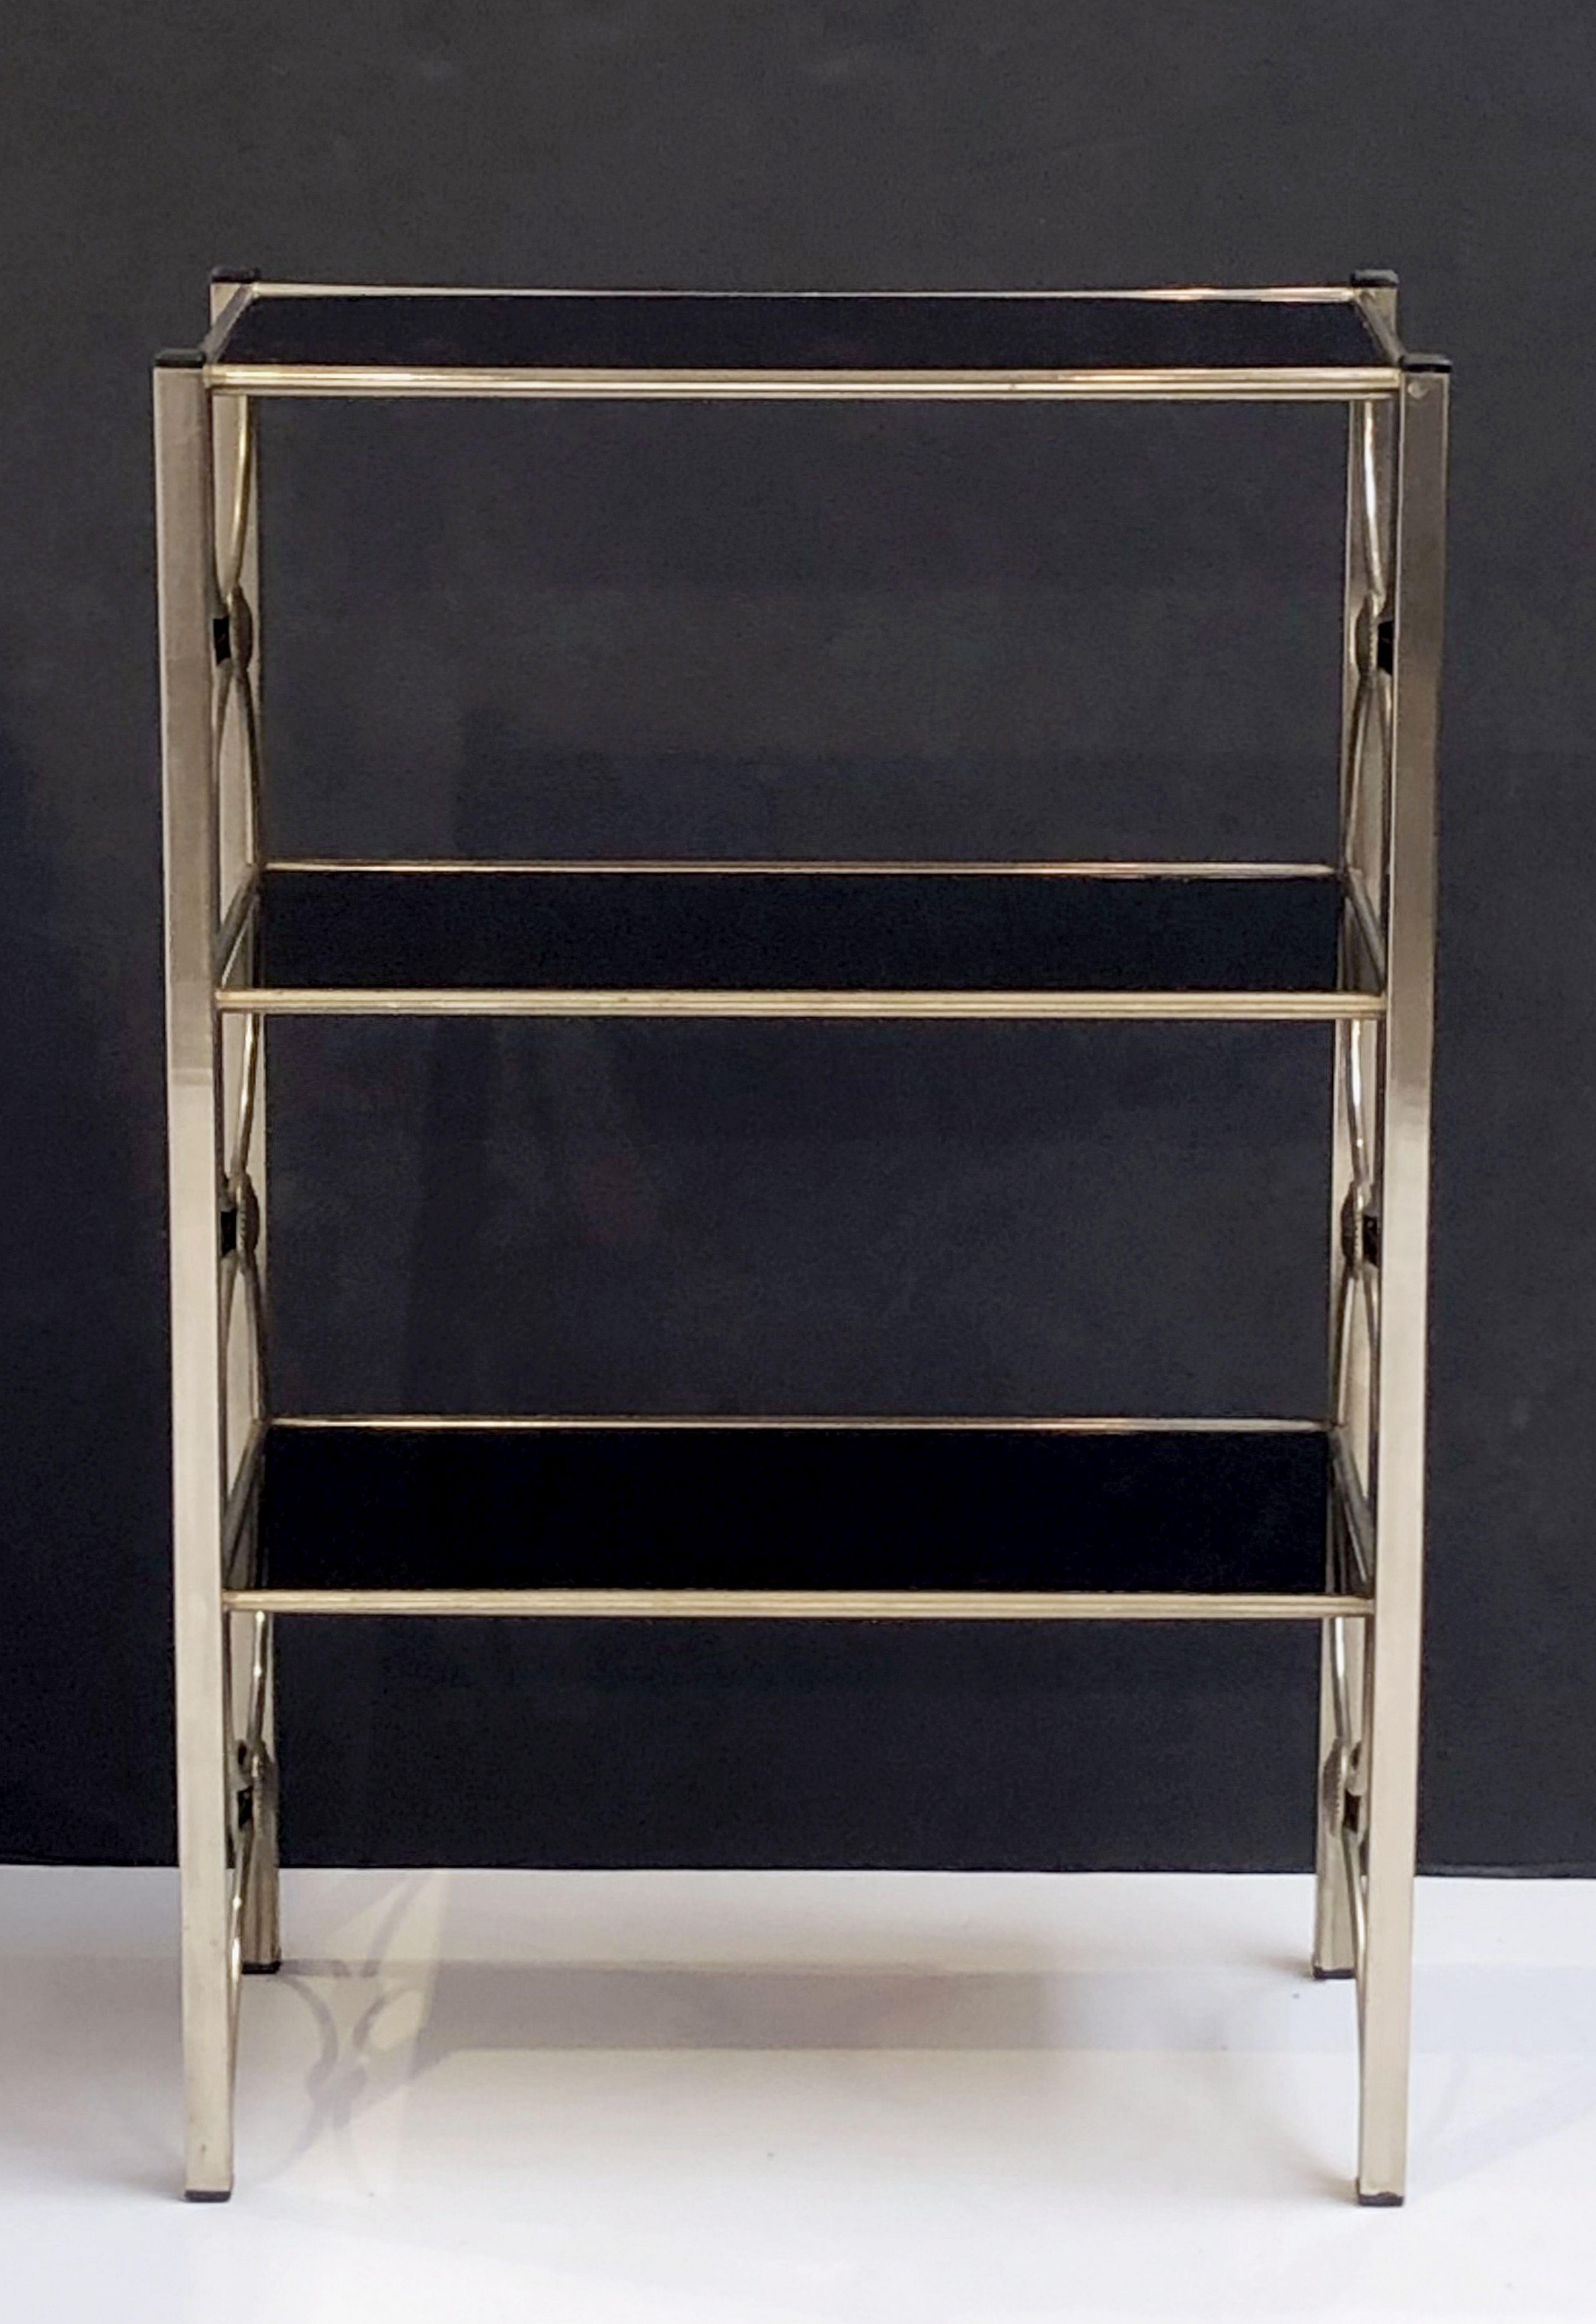 English Three-Tiered Shelves or Étagère of Metal and Black Glass